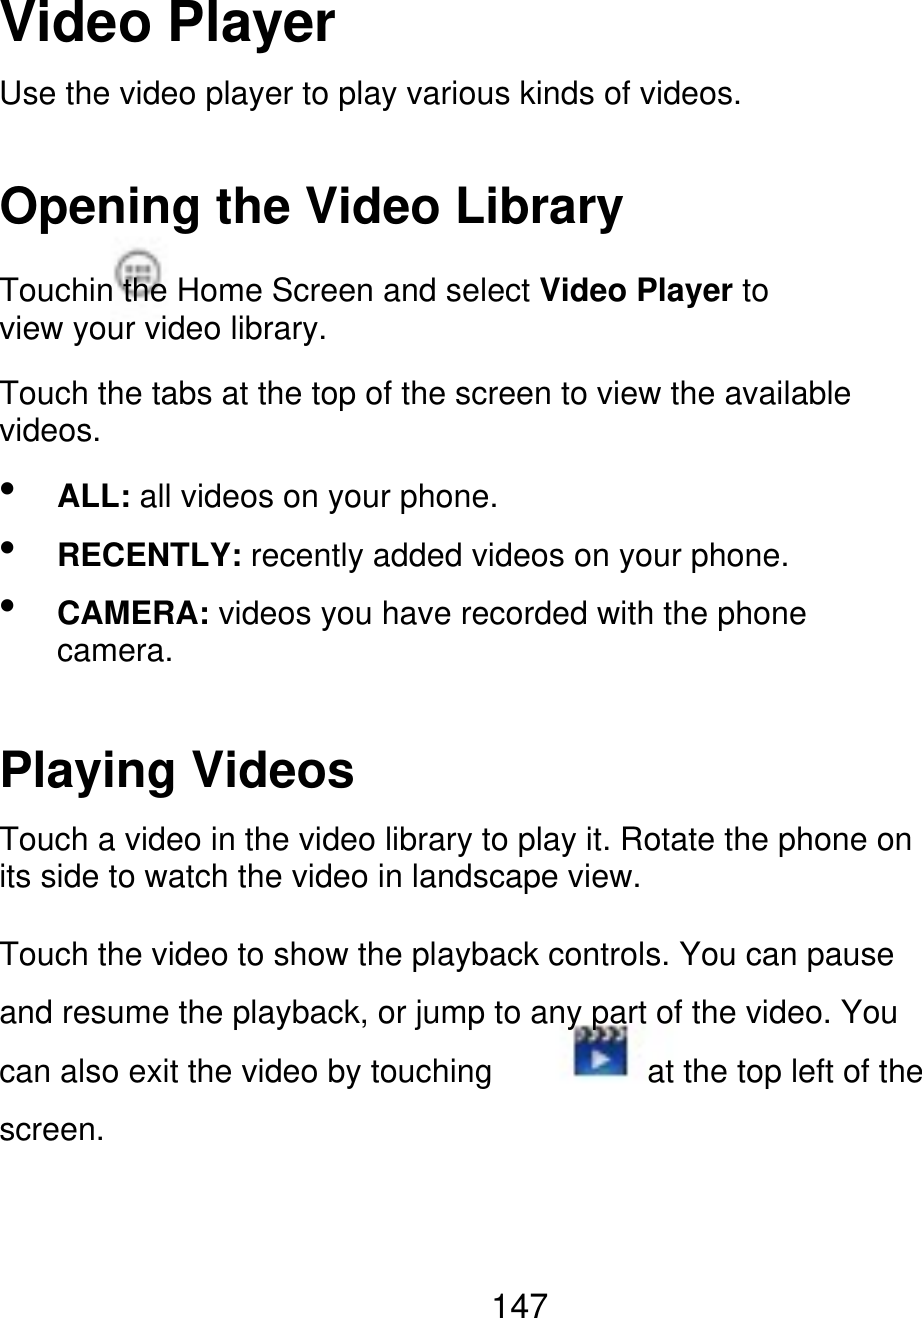 Video Player Use the video player to play various kinds of videos. Opening the Video Library Touchin the Home Screen and select Video Player to view your video library. Touch the tabs at the top of the screen to view the available videos.    ALL: all videos on your phone. RECENTLY: recently added videos on your phone. CAMERA: videos you have recorded with the phone camera. Playing Videos Touch a video in the video library to play it. Rotate the phone on its side to watch the video in landscape view. Touch the video to show the playback controls. You can pause and resume the playback, or jump to any part of the video. You can also exit the video by touching screen. at the top left of the 147 